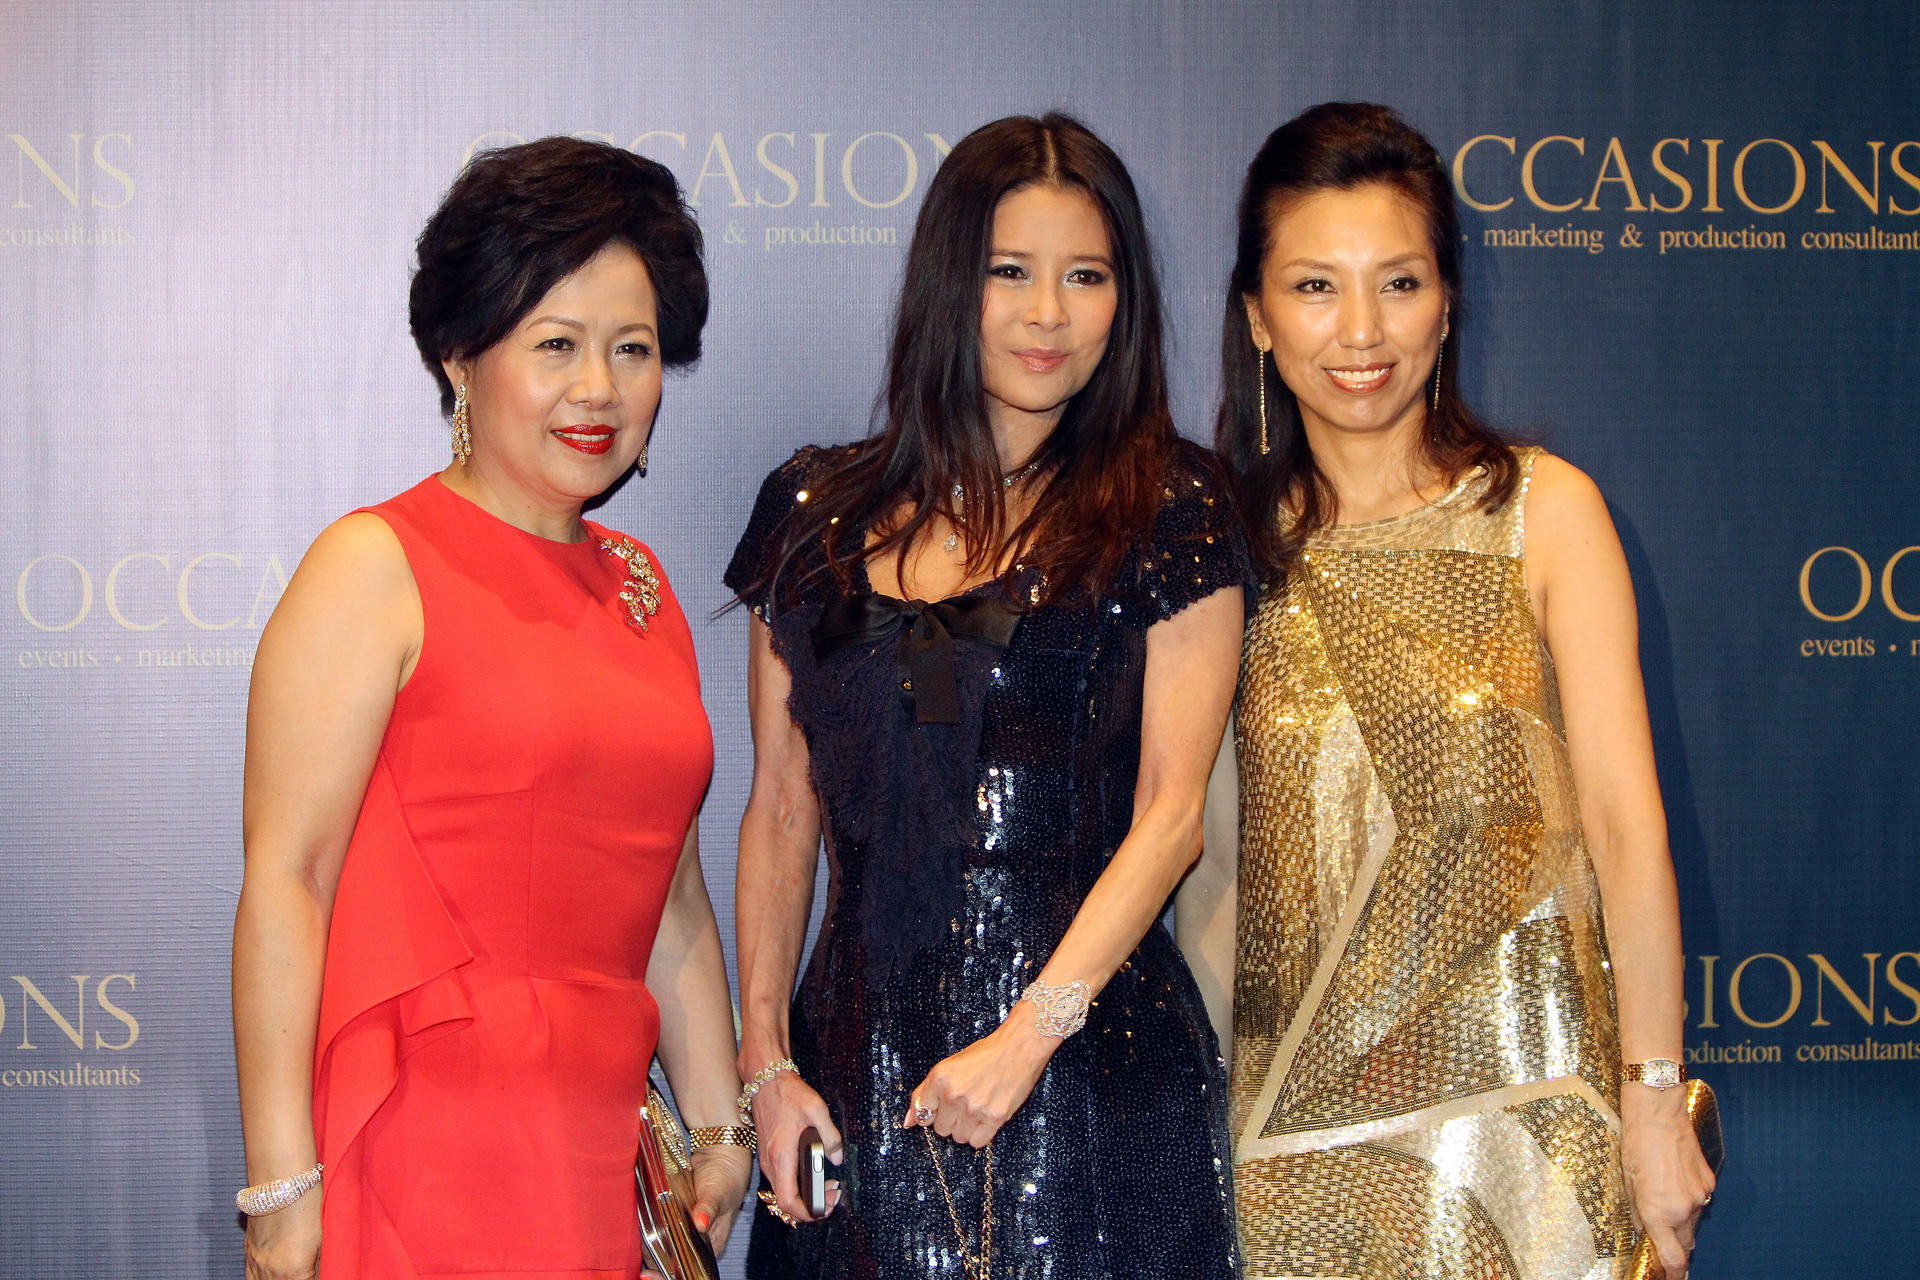 From left: Laura Cha, Yvette Yuen and Josephine Liang at the 25th anniversary celebration of Occasions. Photo: David Wong